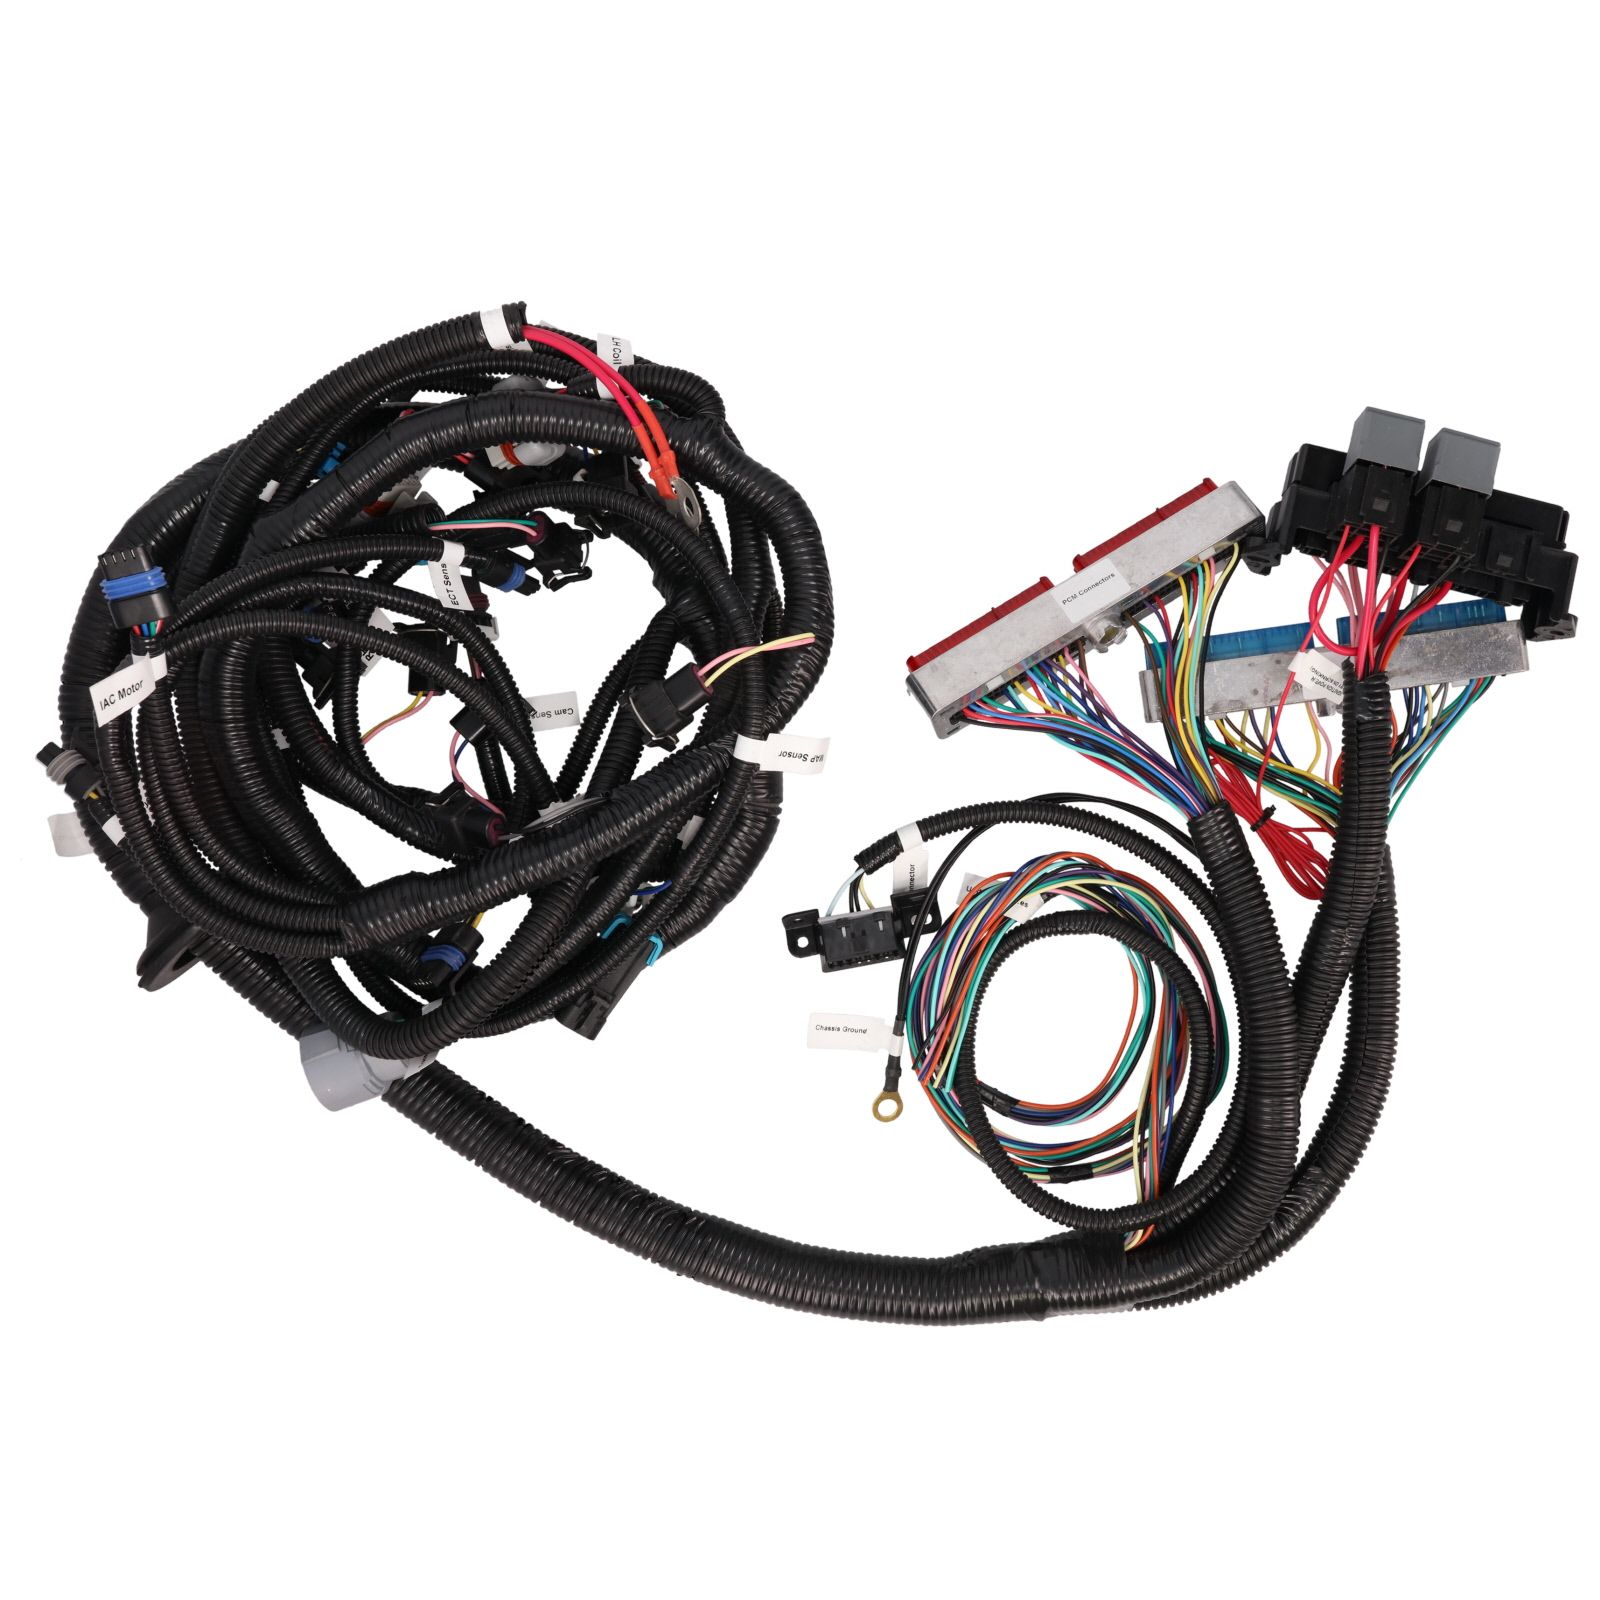 LS Swap Wiring Harness For 97-06 LS With 4L60E Transmission(Drive By Cable)